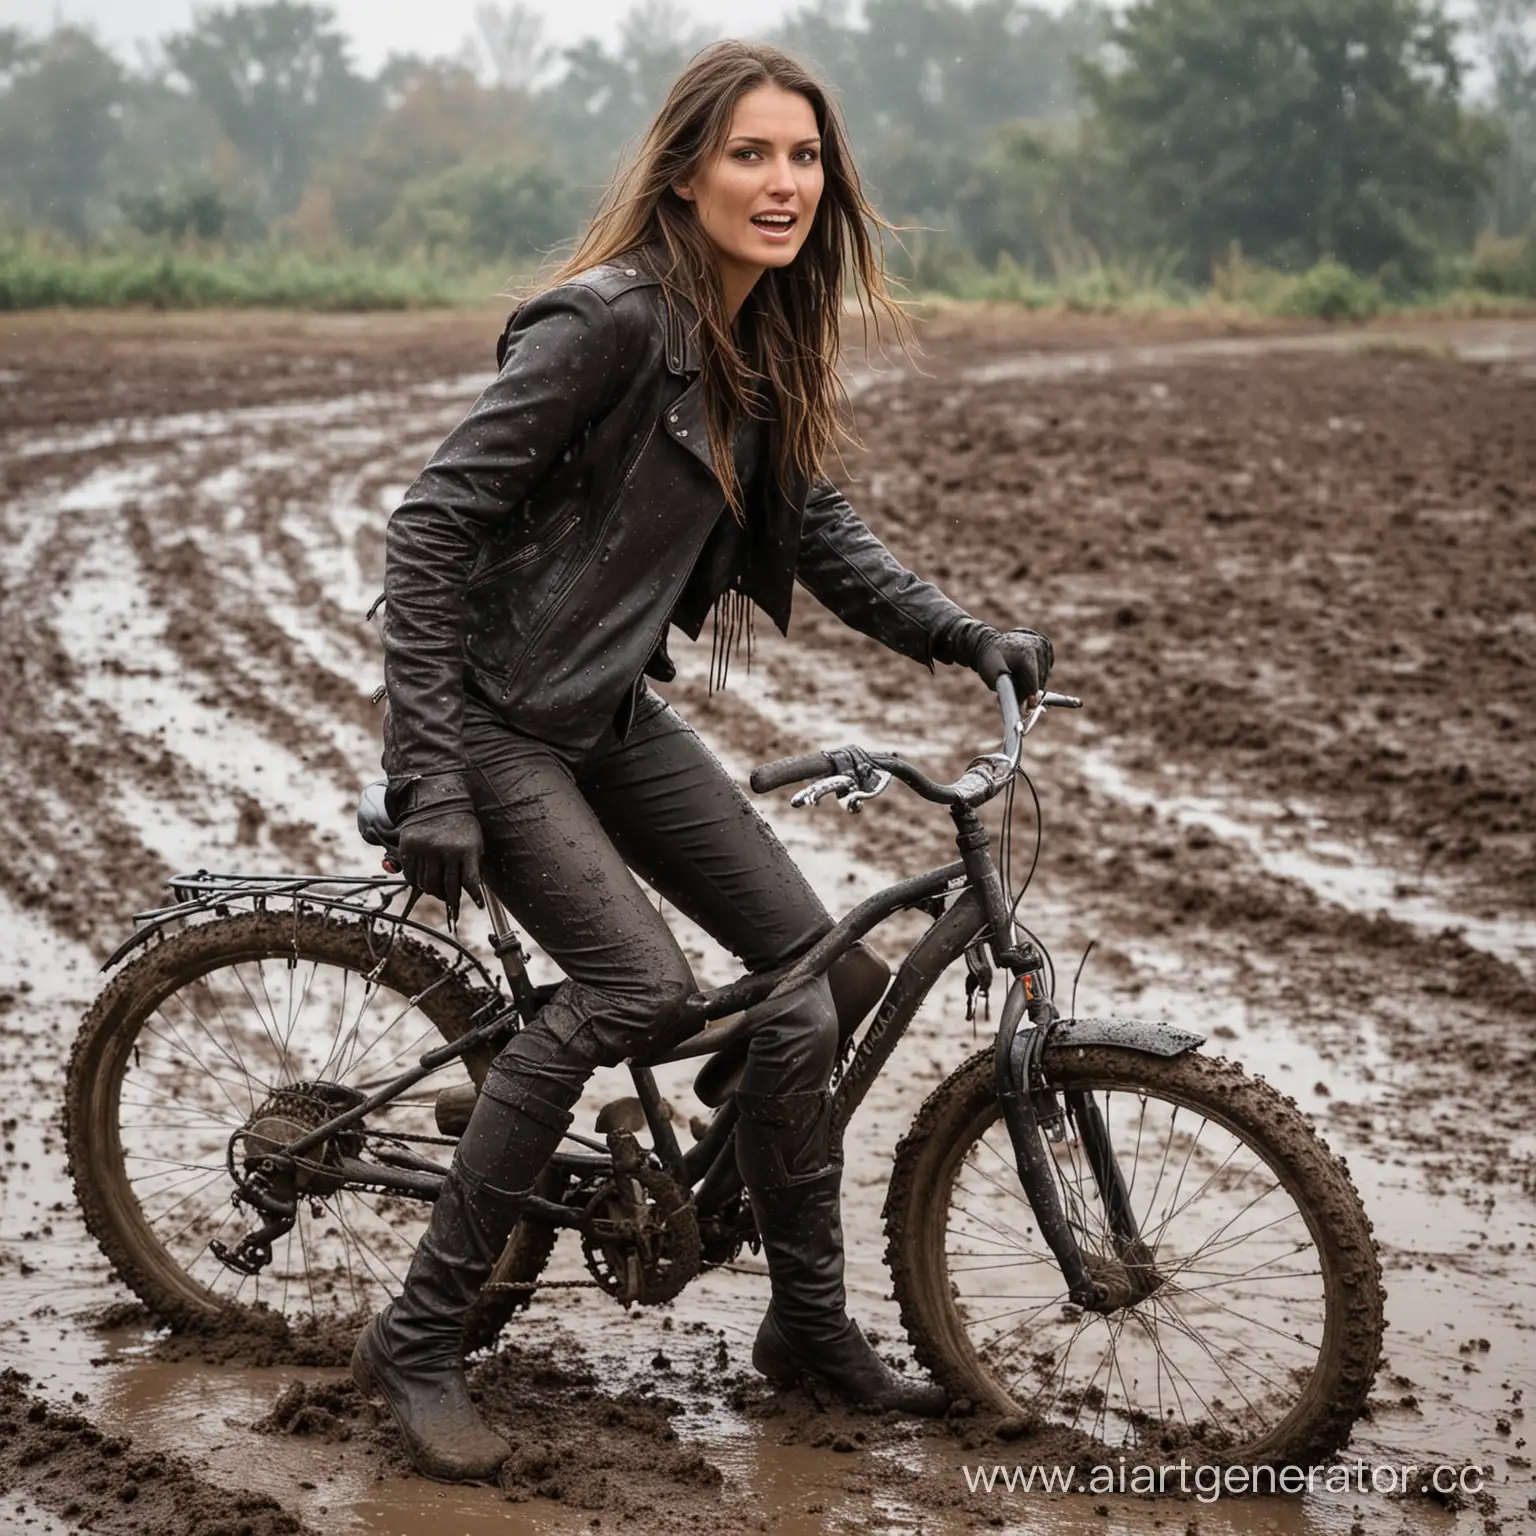 A woman rides a bike through the mud in a dirty leather coat and leggings all splattered with mud